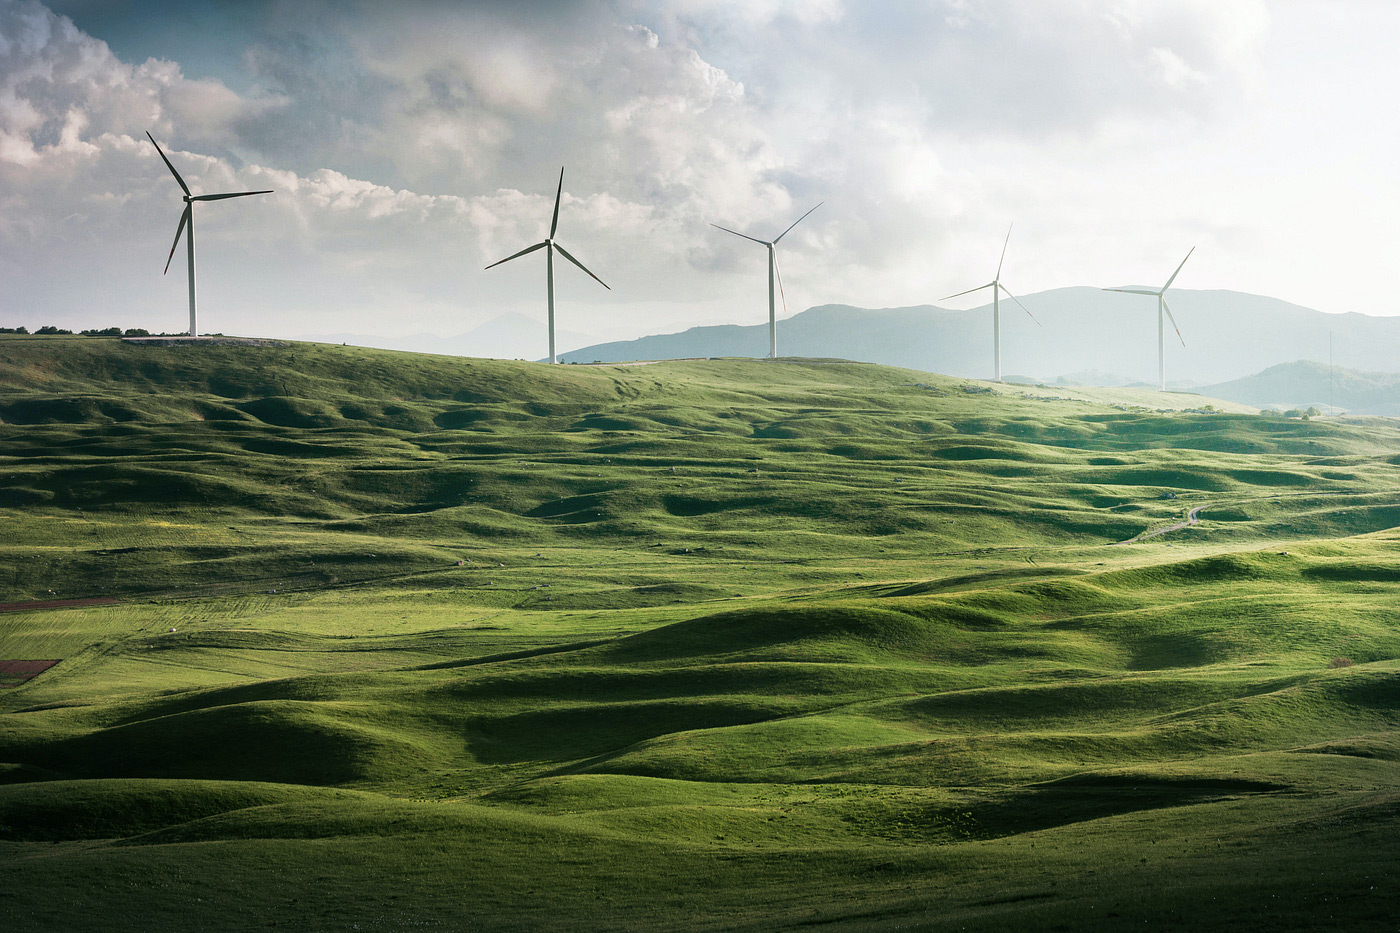 Photograph of wind turbines sitting on rolling, green hills. A blue sky and clouds are in the background.